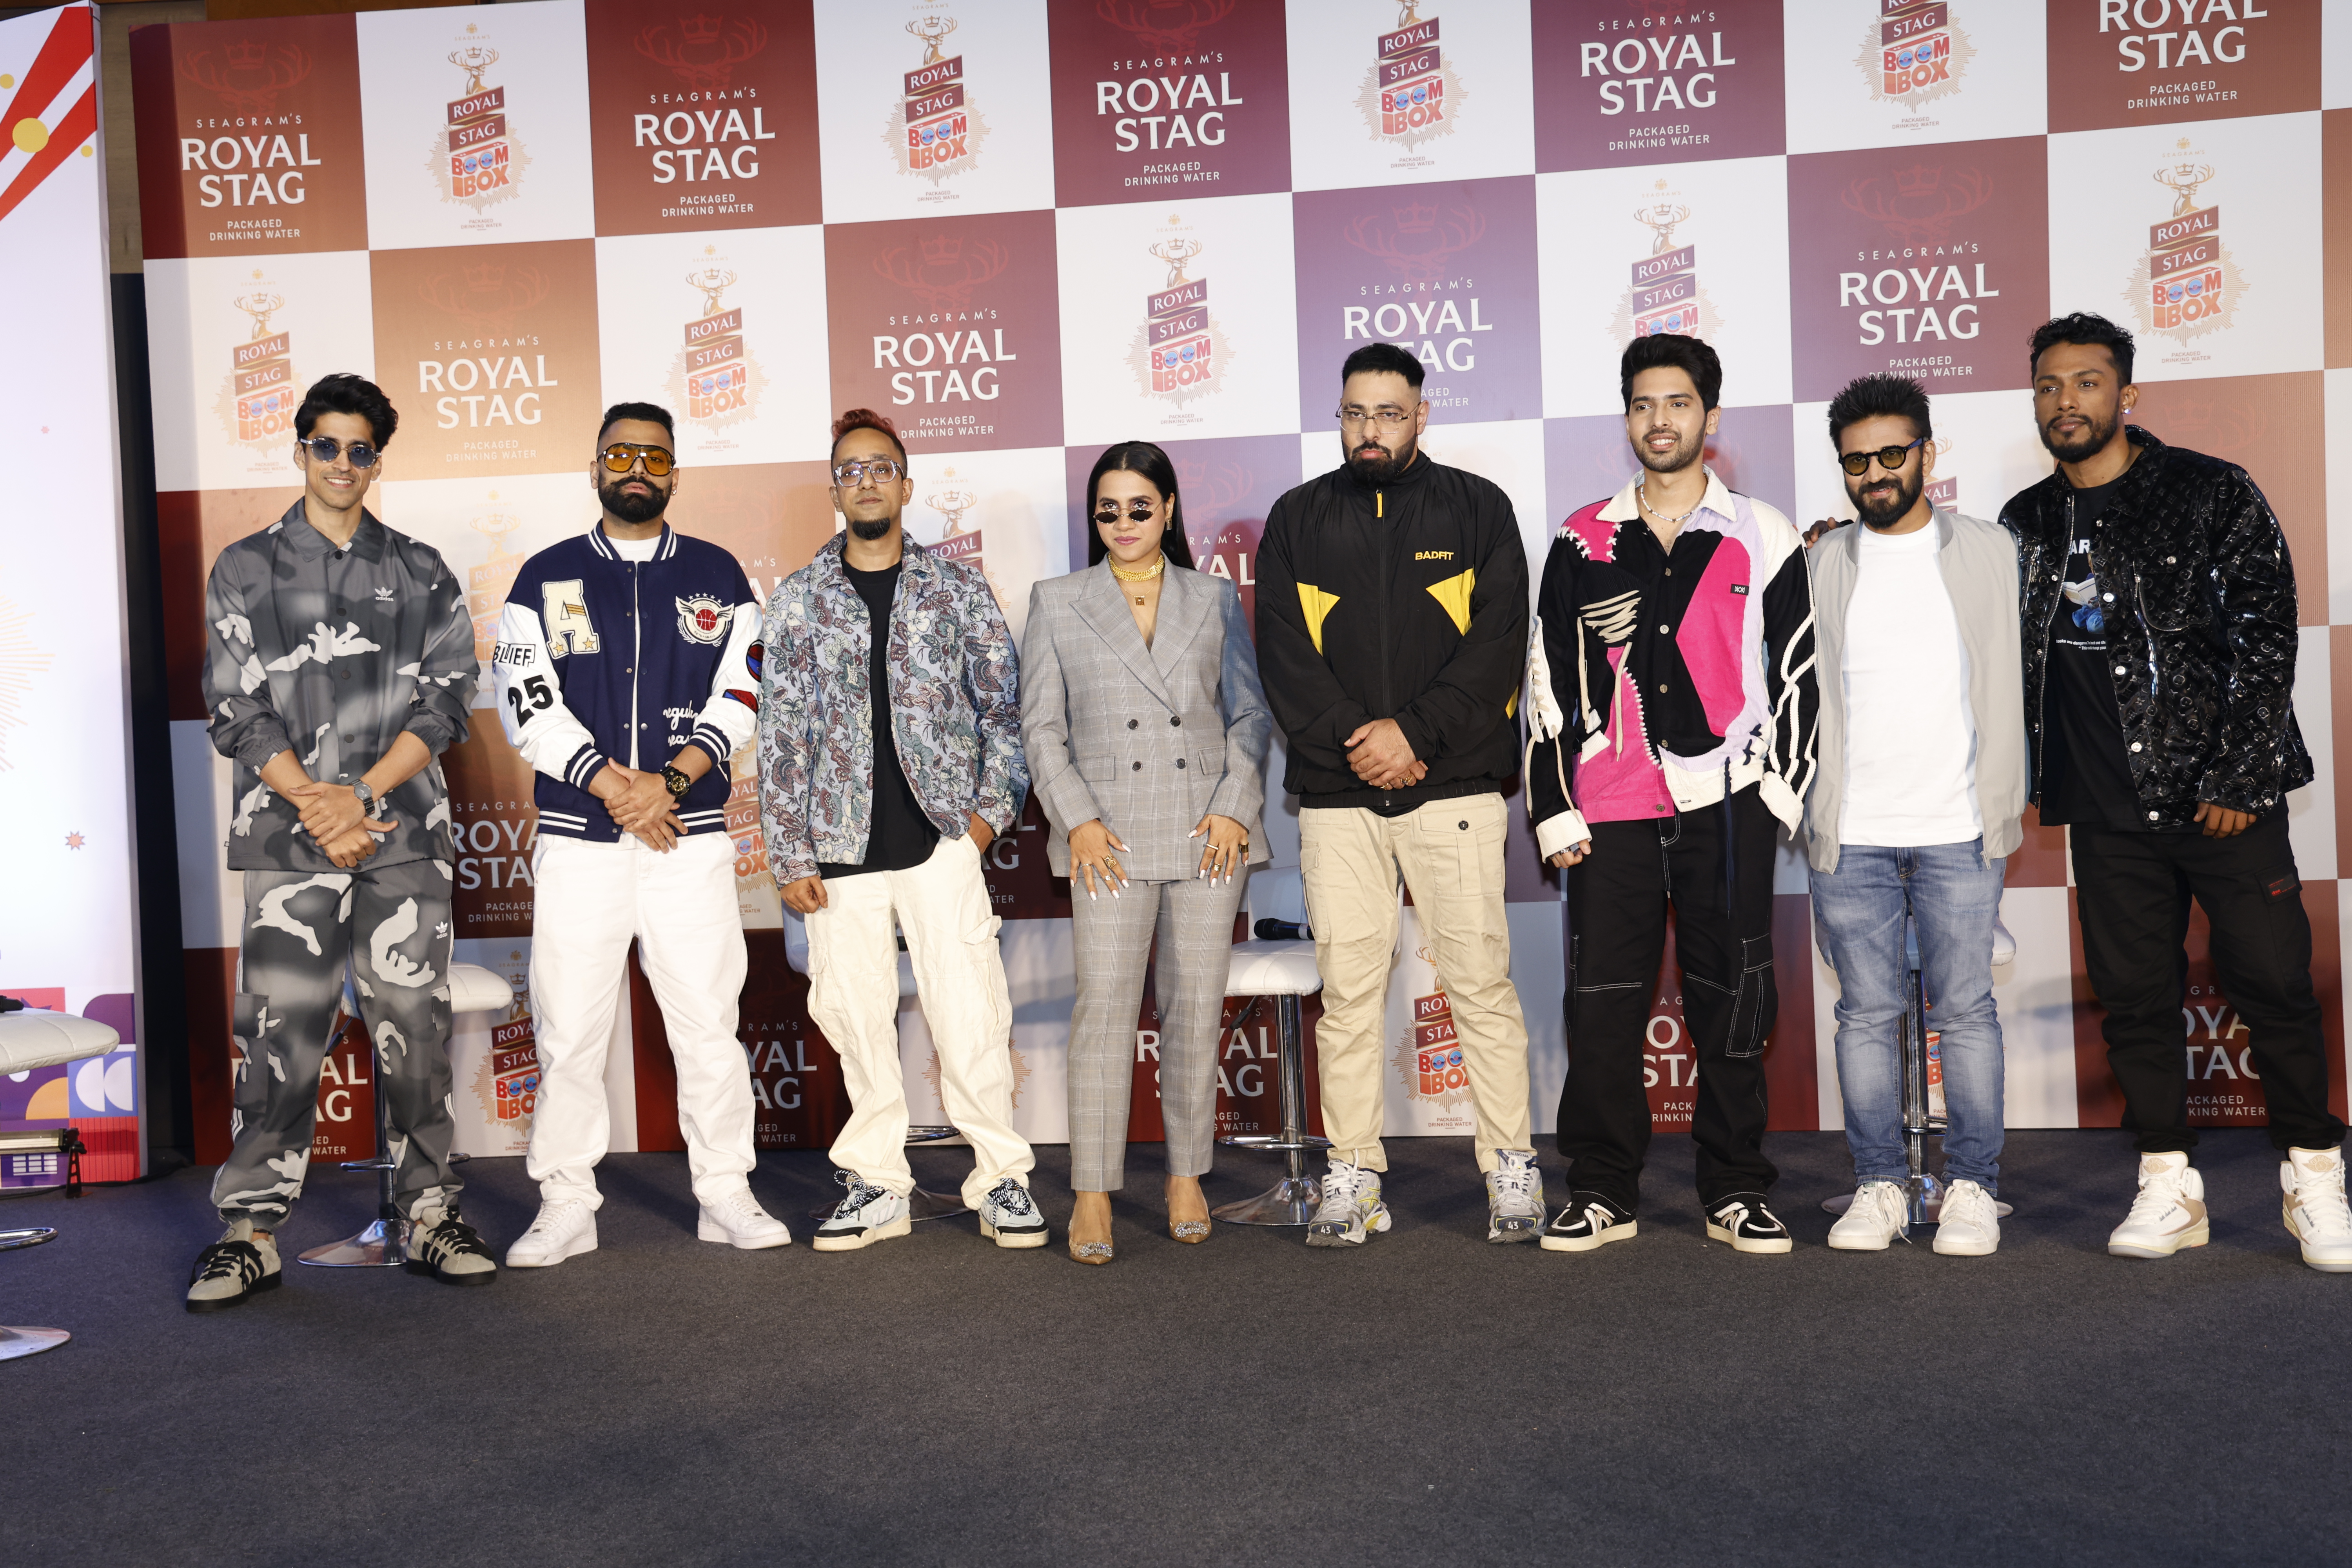 Seagram’s Royal Stag Unveils A New Music Property for New India, ROYAL STAG BOOMBOX -The Original Sound Of Generation Large